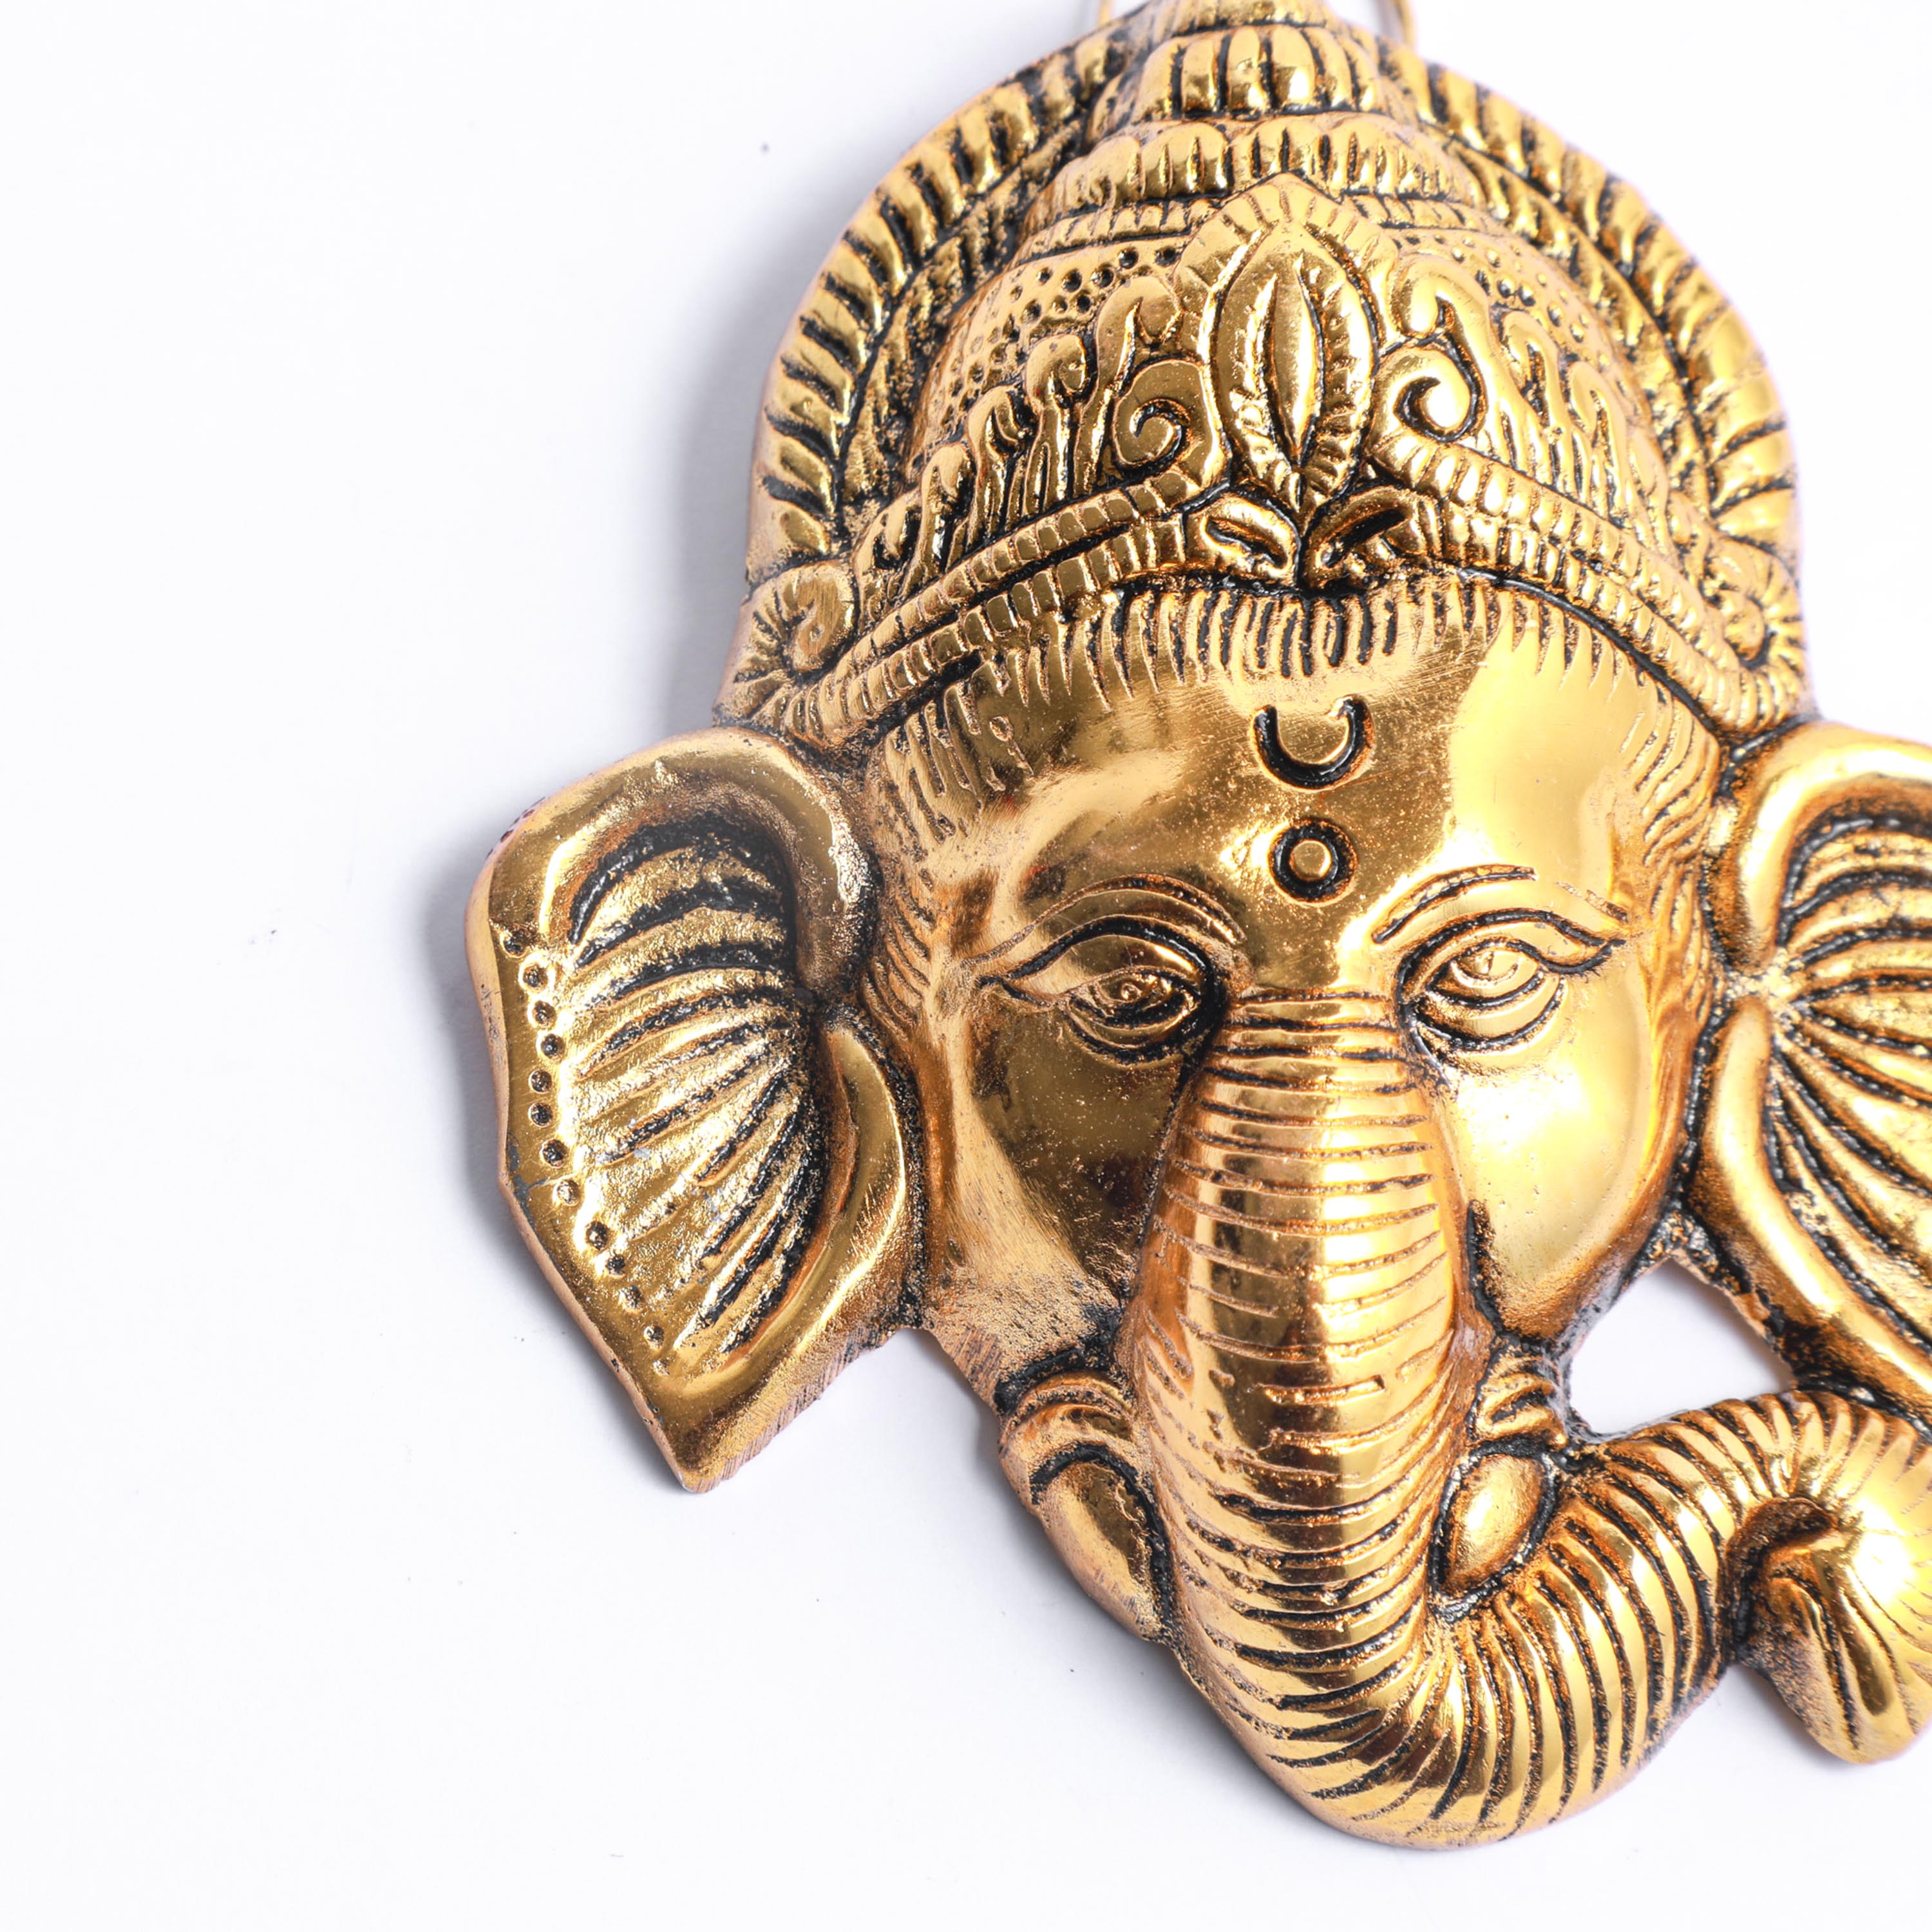 Lord Ganesh face for home/office decor in the USA